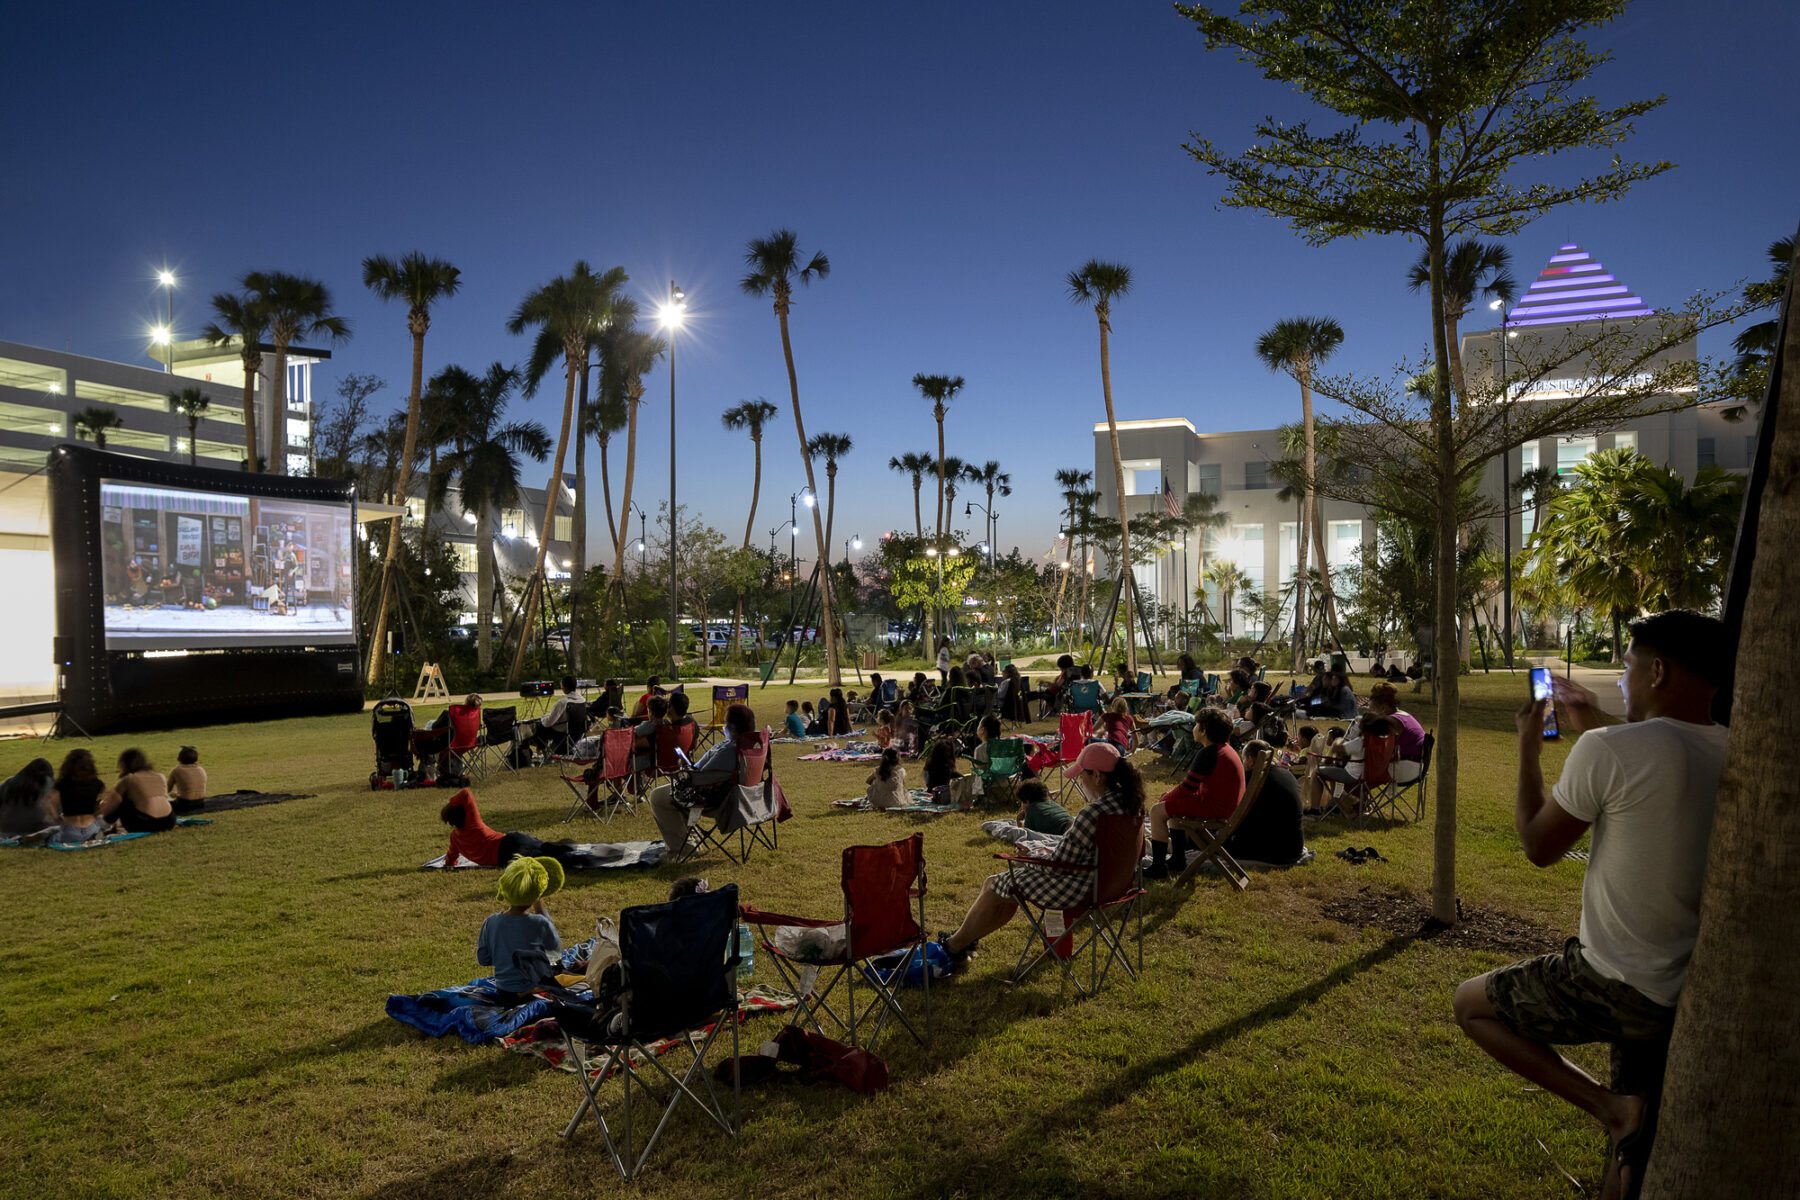 photograph of park visitors gathering on lawn space during an evening outdoor movie screening